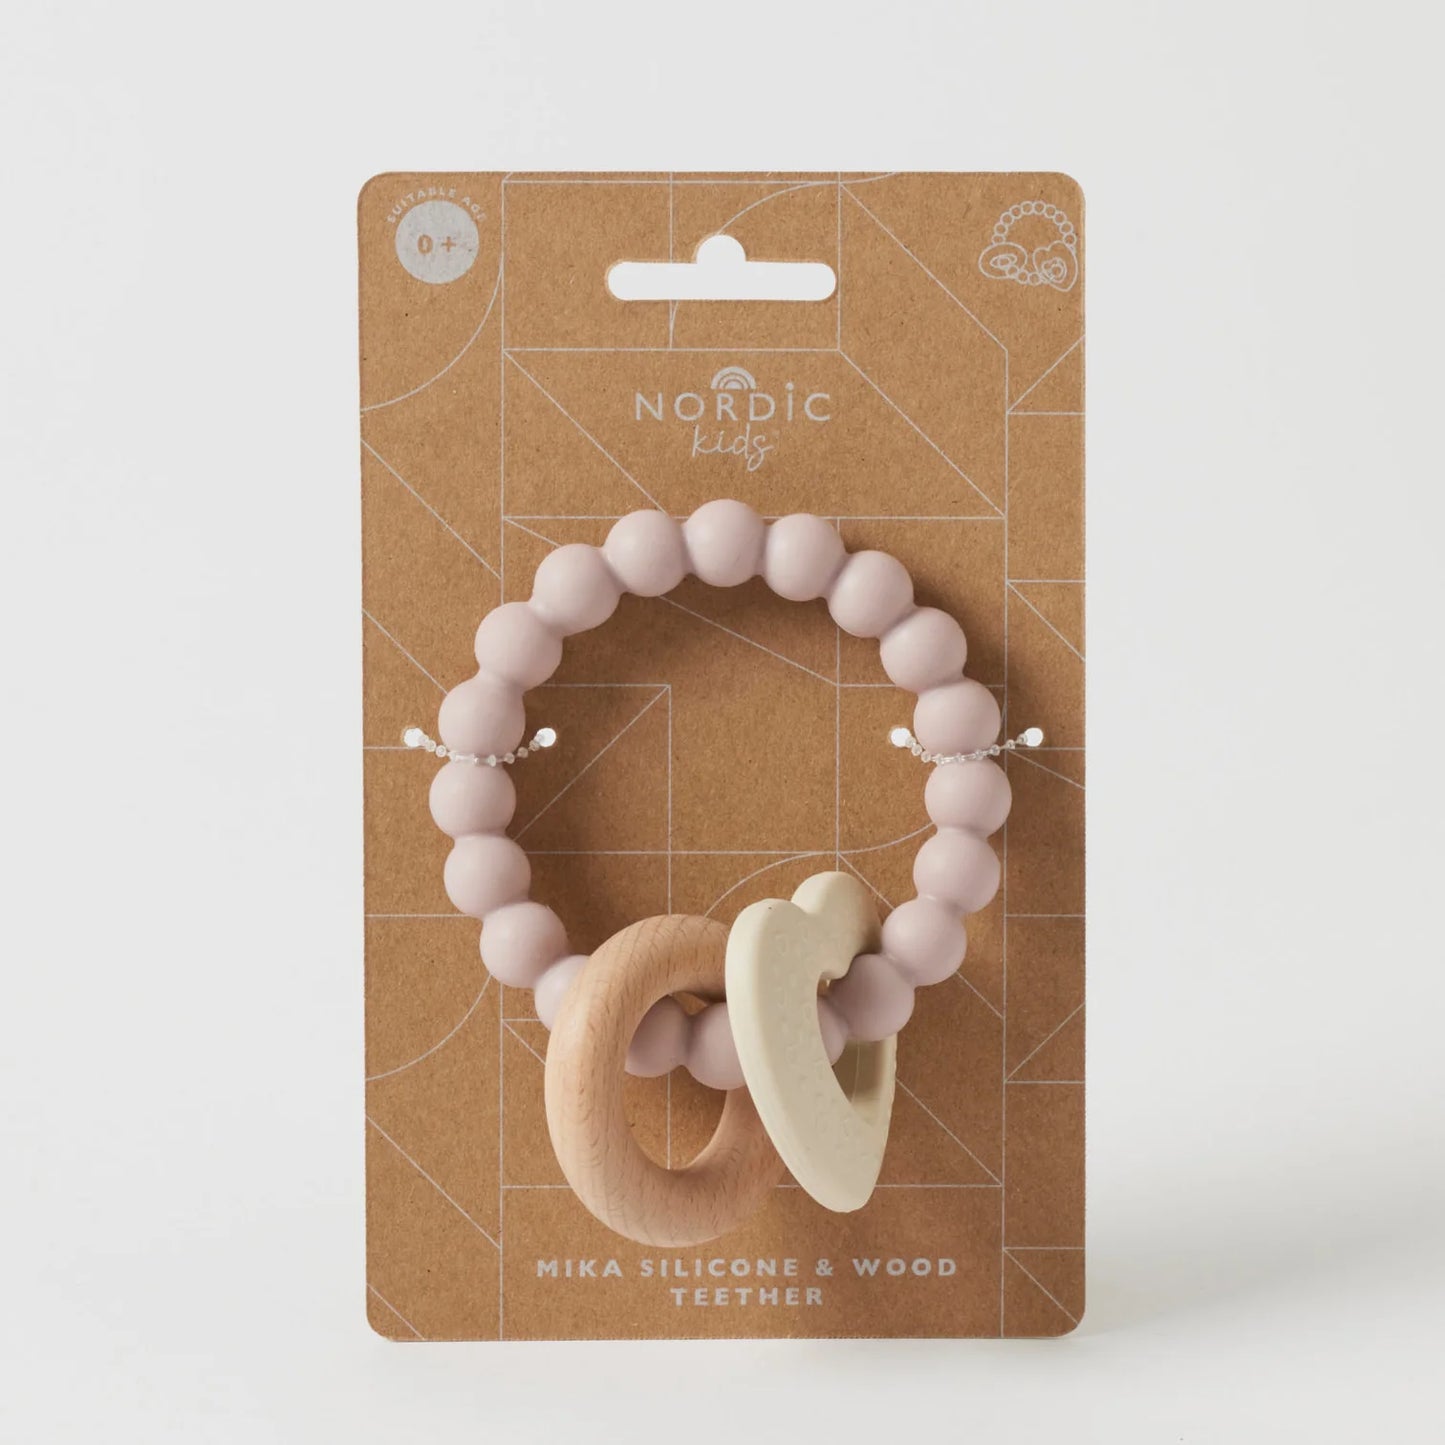 Silicone and Wood Teethers